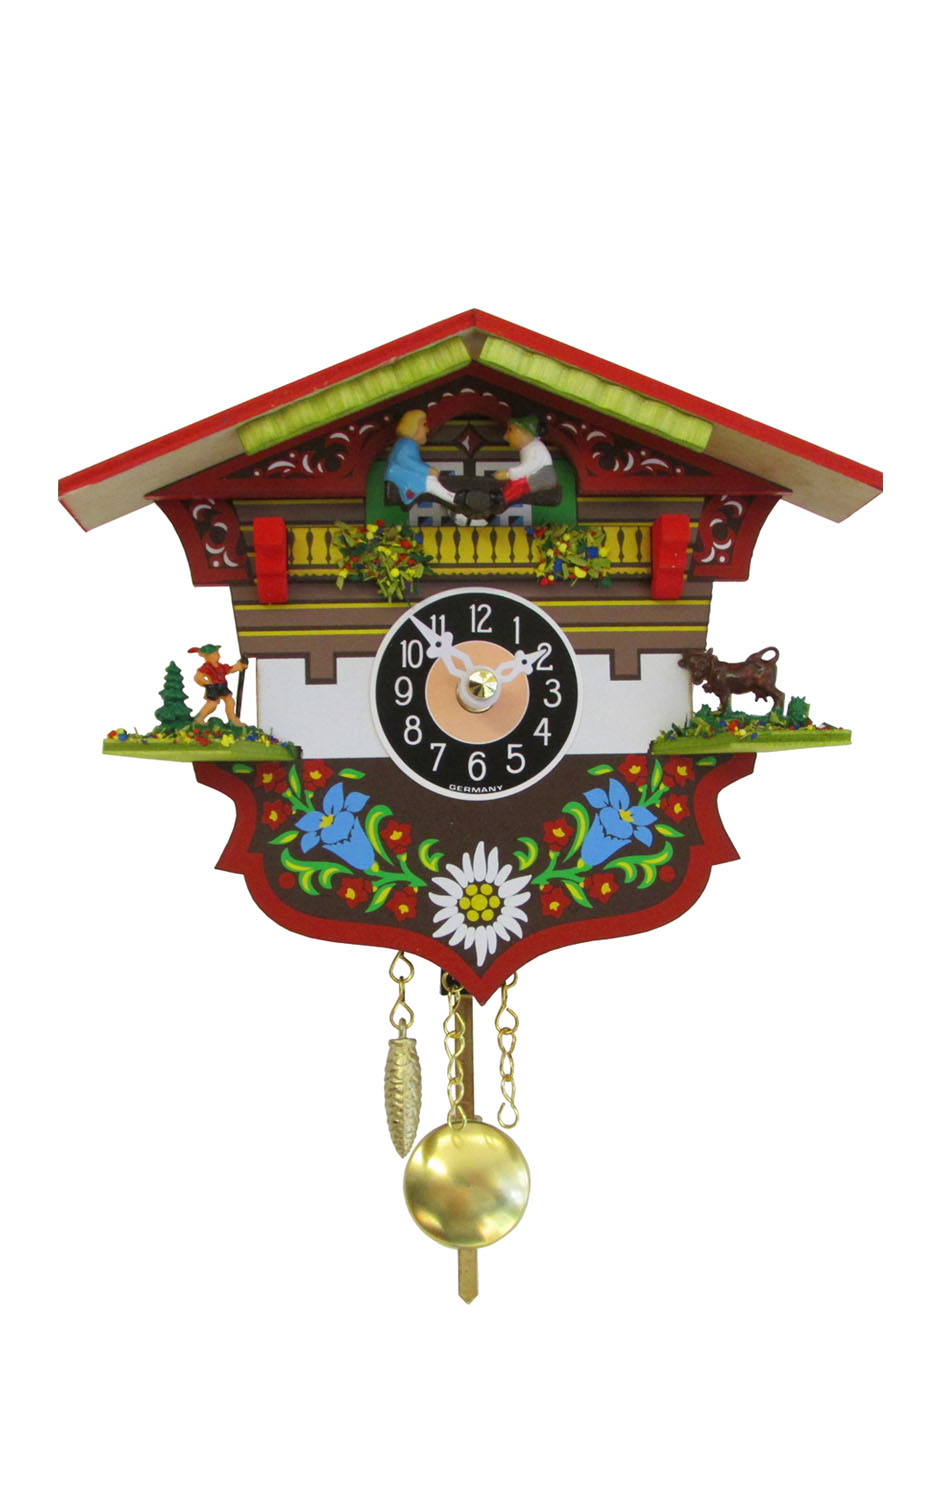 Engstler Battery-operated Clock - Mini Size with Music/Chimes - 5"H x 5.75"W x 2.5"D